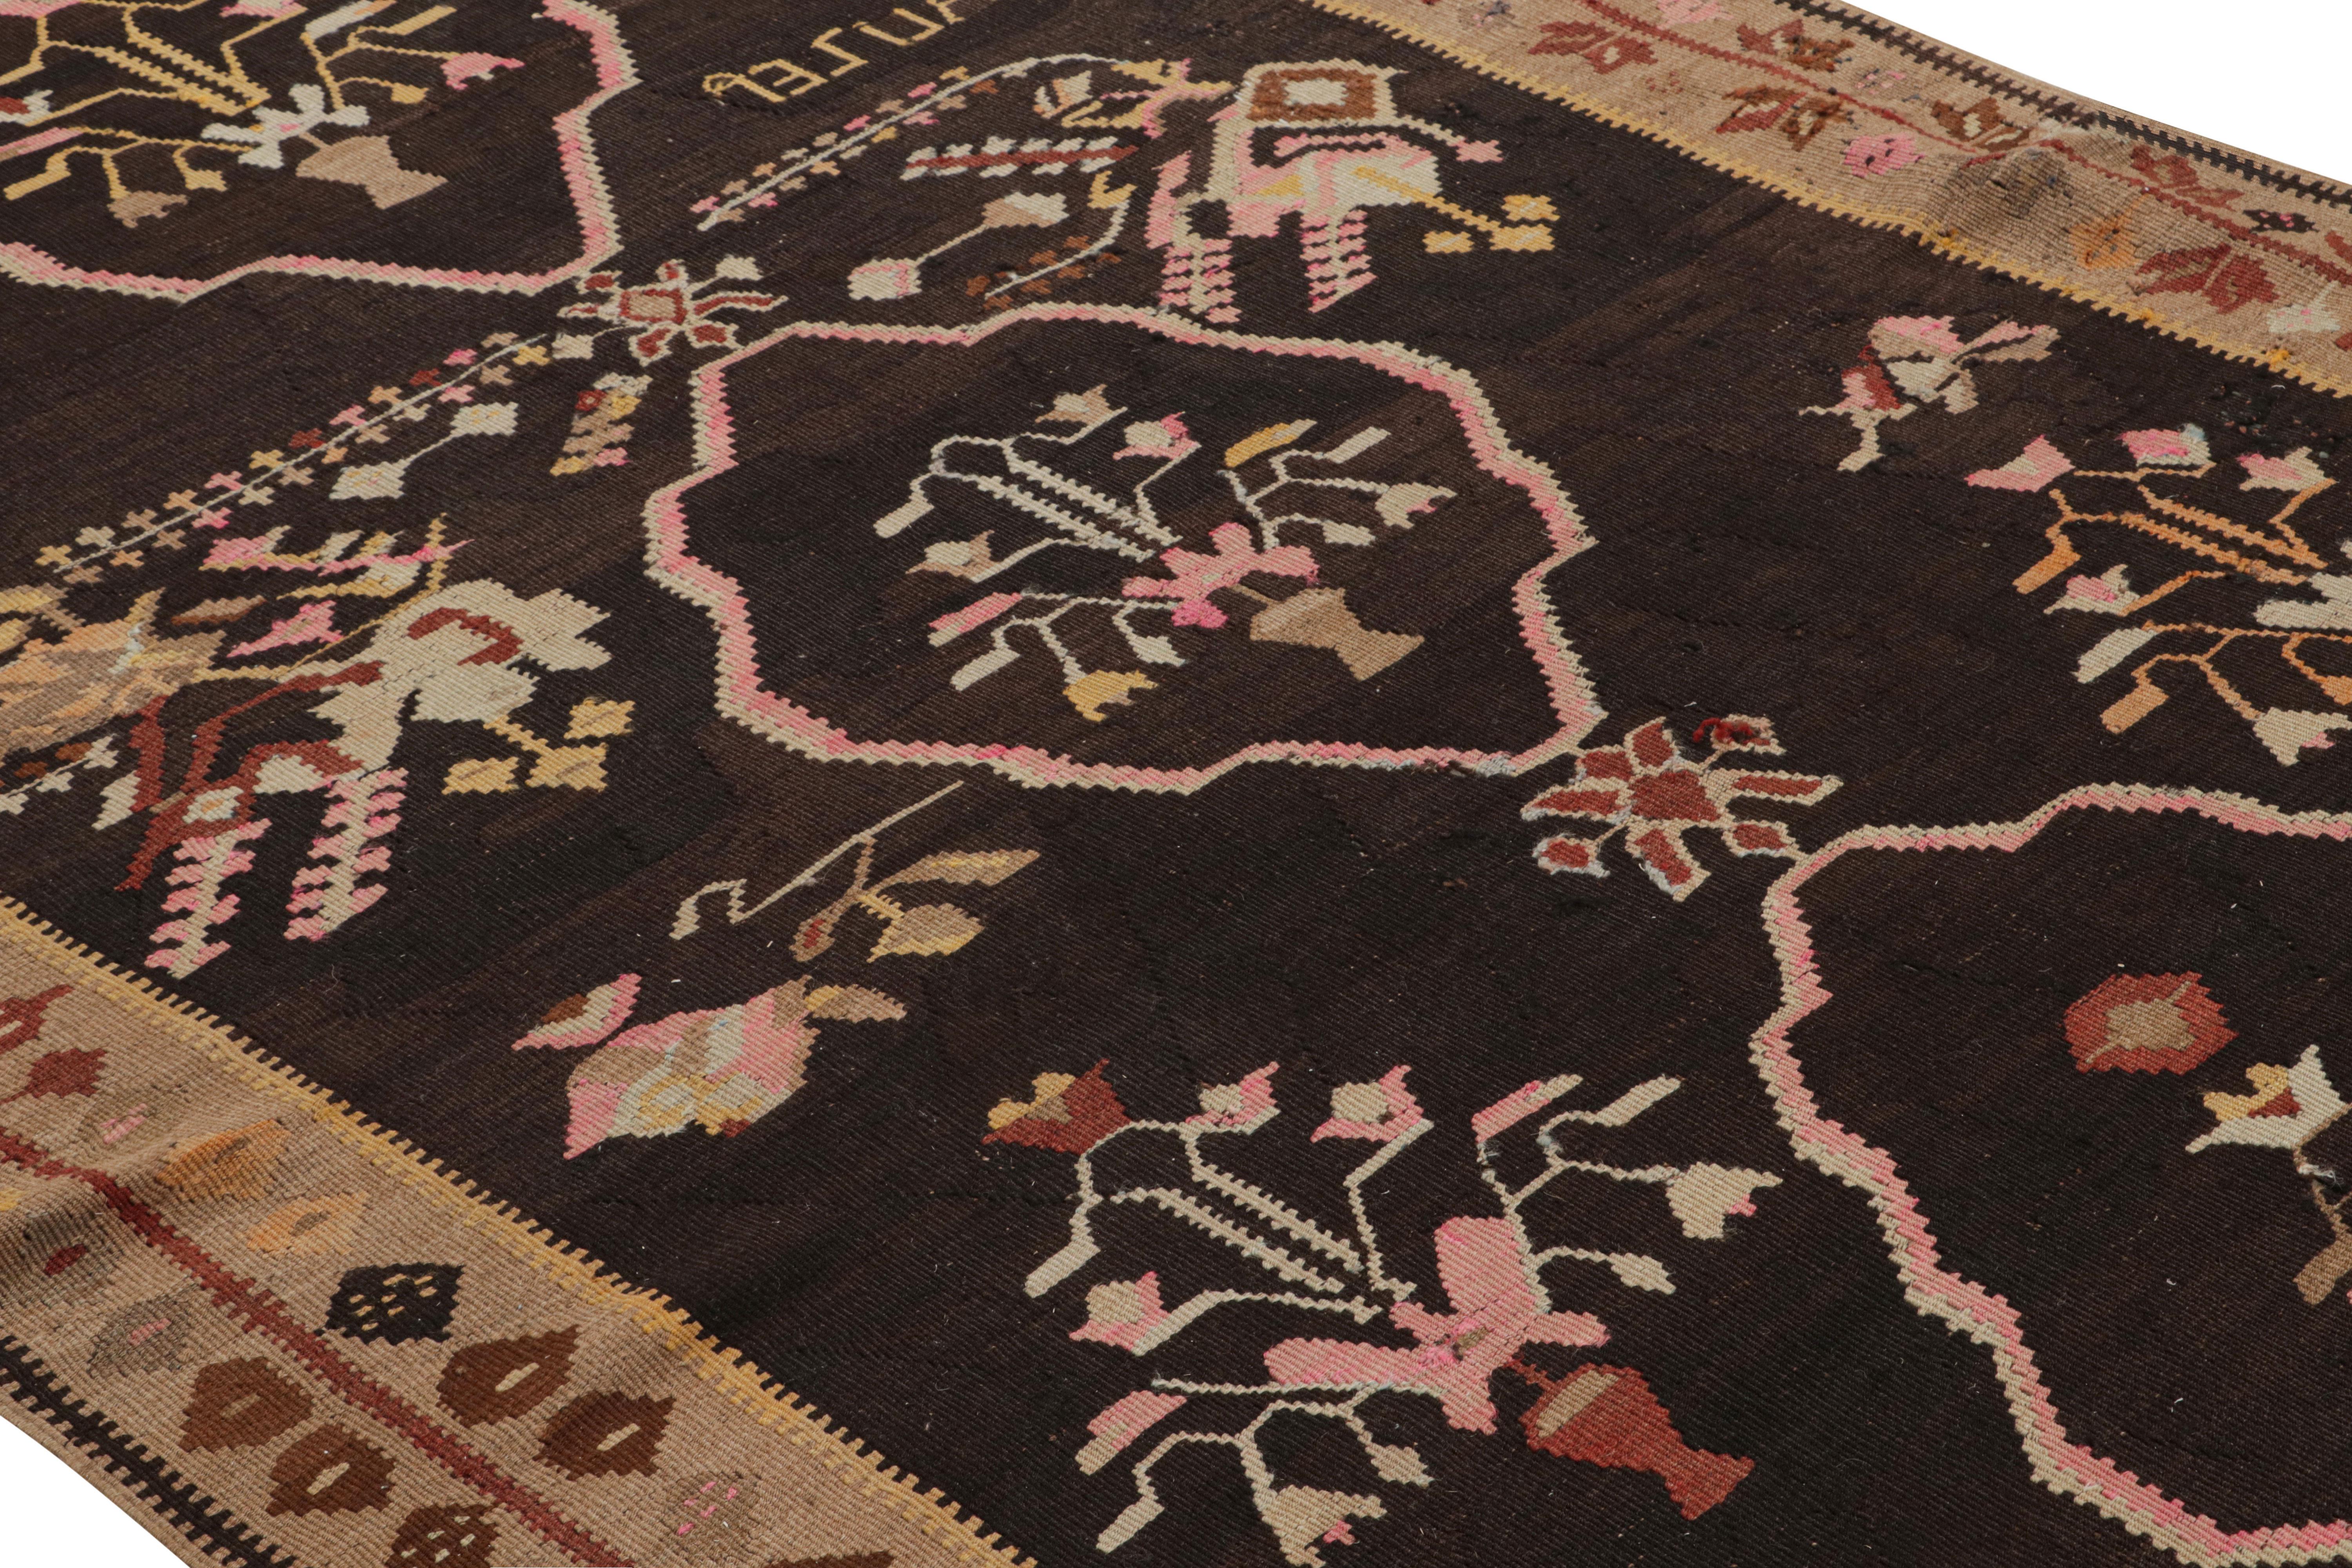 Handwoven in a wool flat-weave originating from Turkey circa 1950-1960, this vintage Kilim rug enjoys a midcentury Bessarabian Kilim style popular to European and Romanian ancestry, seen particularly in the distinctive geometric floral patterns in